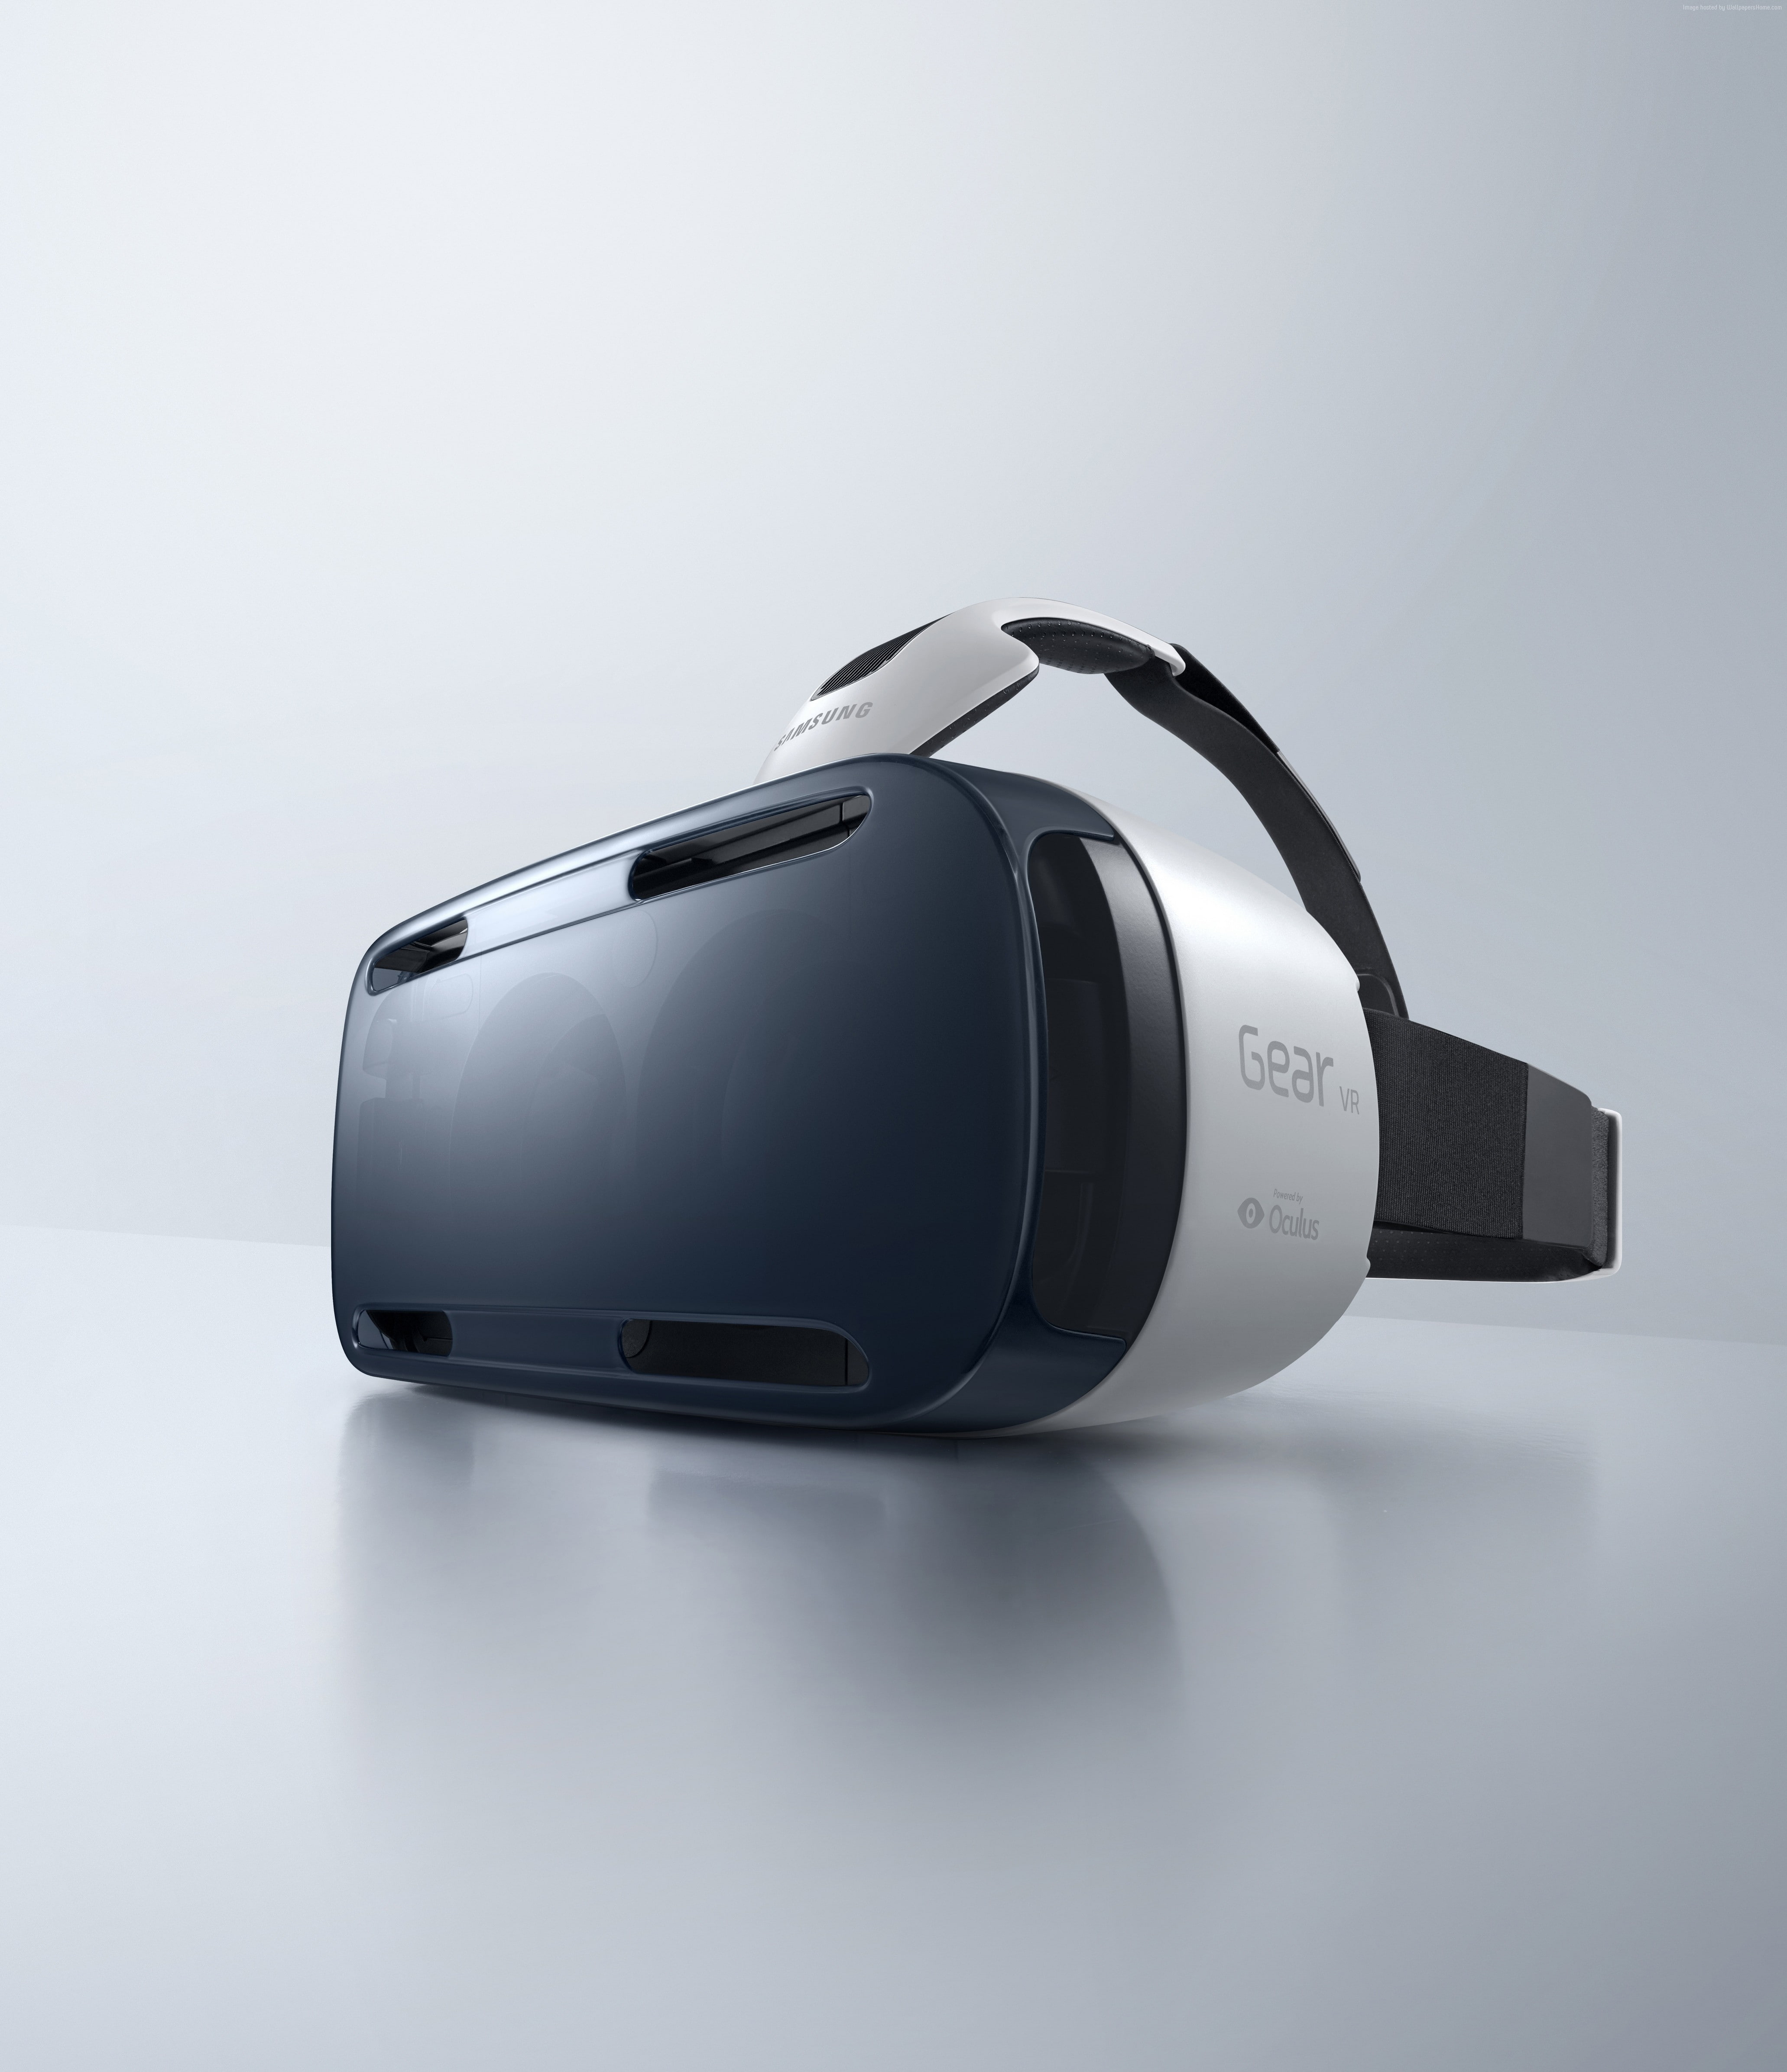 VR headset, unboxing, Samsung Gear VR, review, Hi-Tech News of 2015